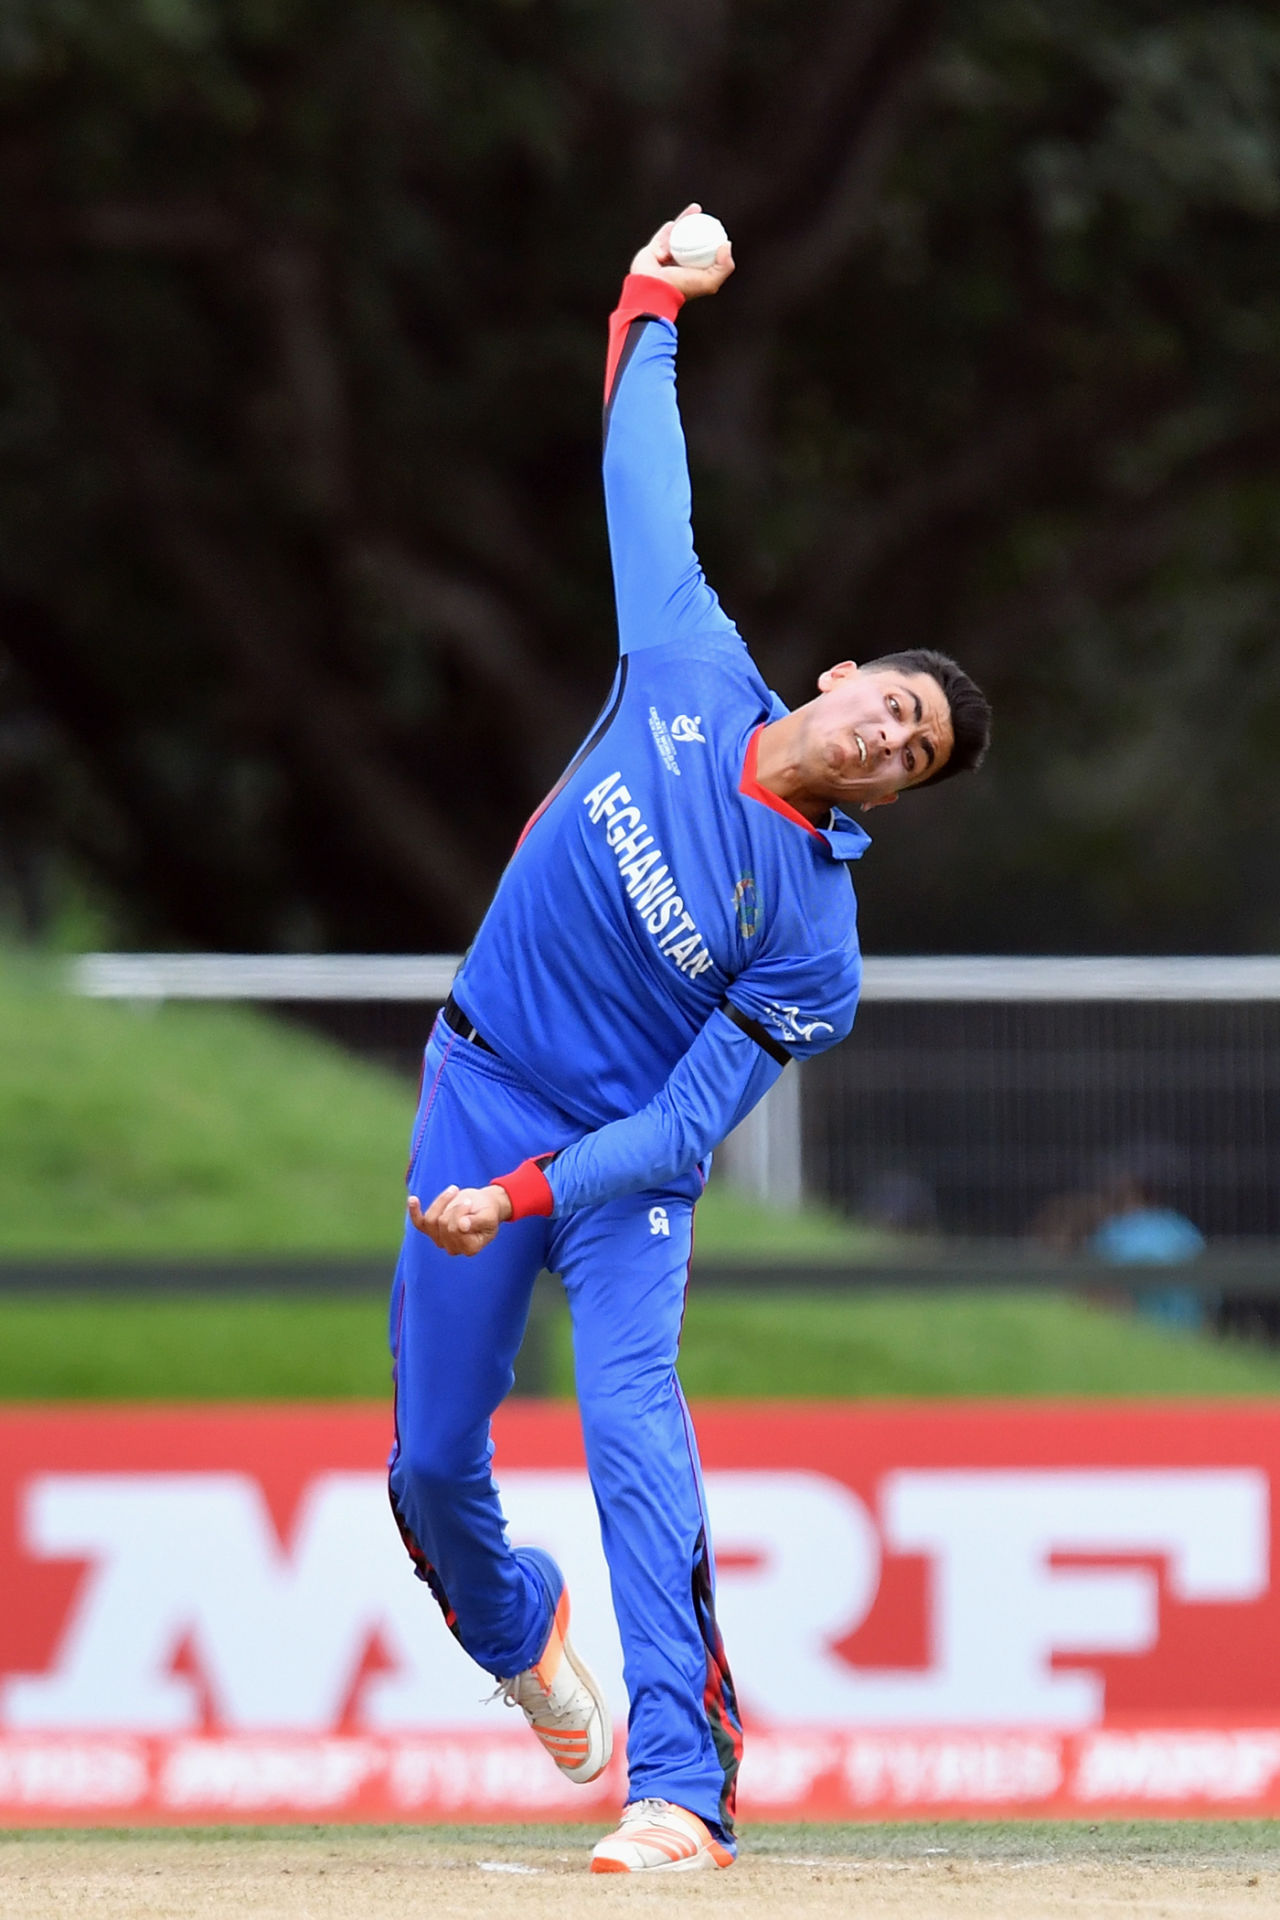 Mujeeb Ur Rahman in his delivery stride, New Zealand v Afghanistan, Under-19 World Cup, quarter-final, Christchurch, January 25, 2018